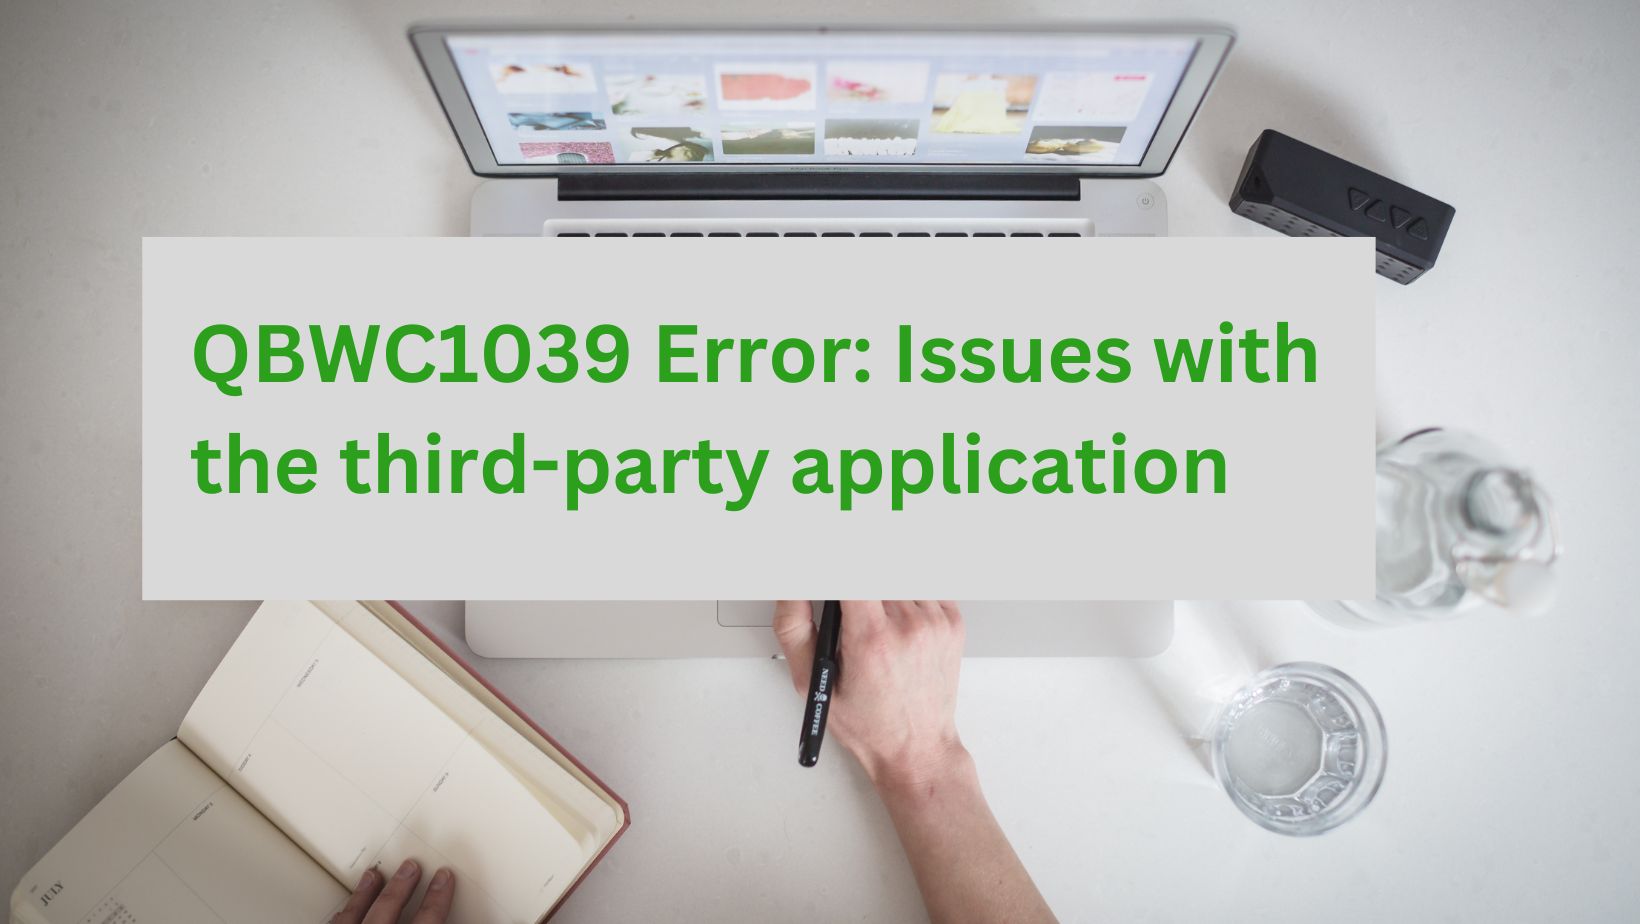 QBWC1039 Error: Issues with the third-party application